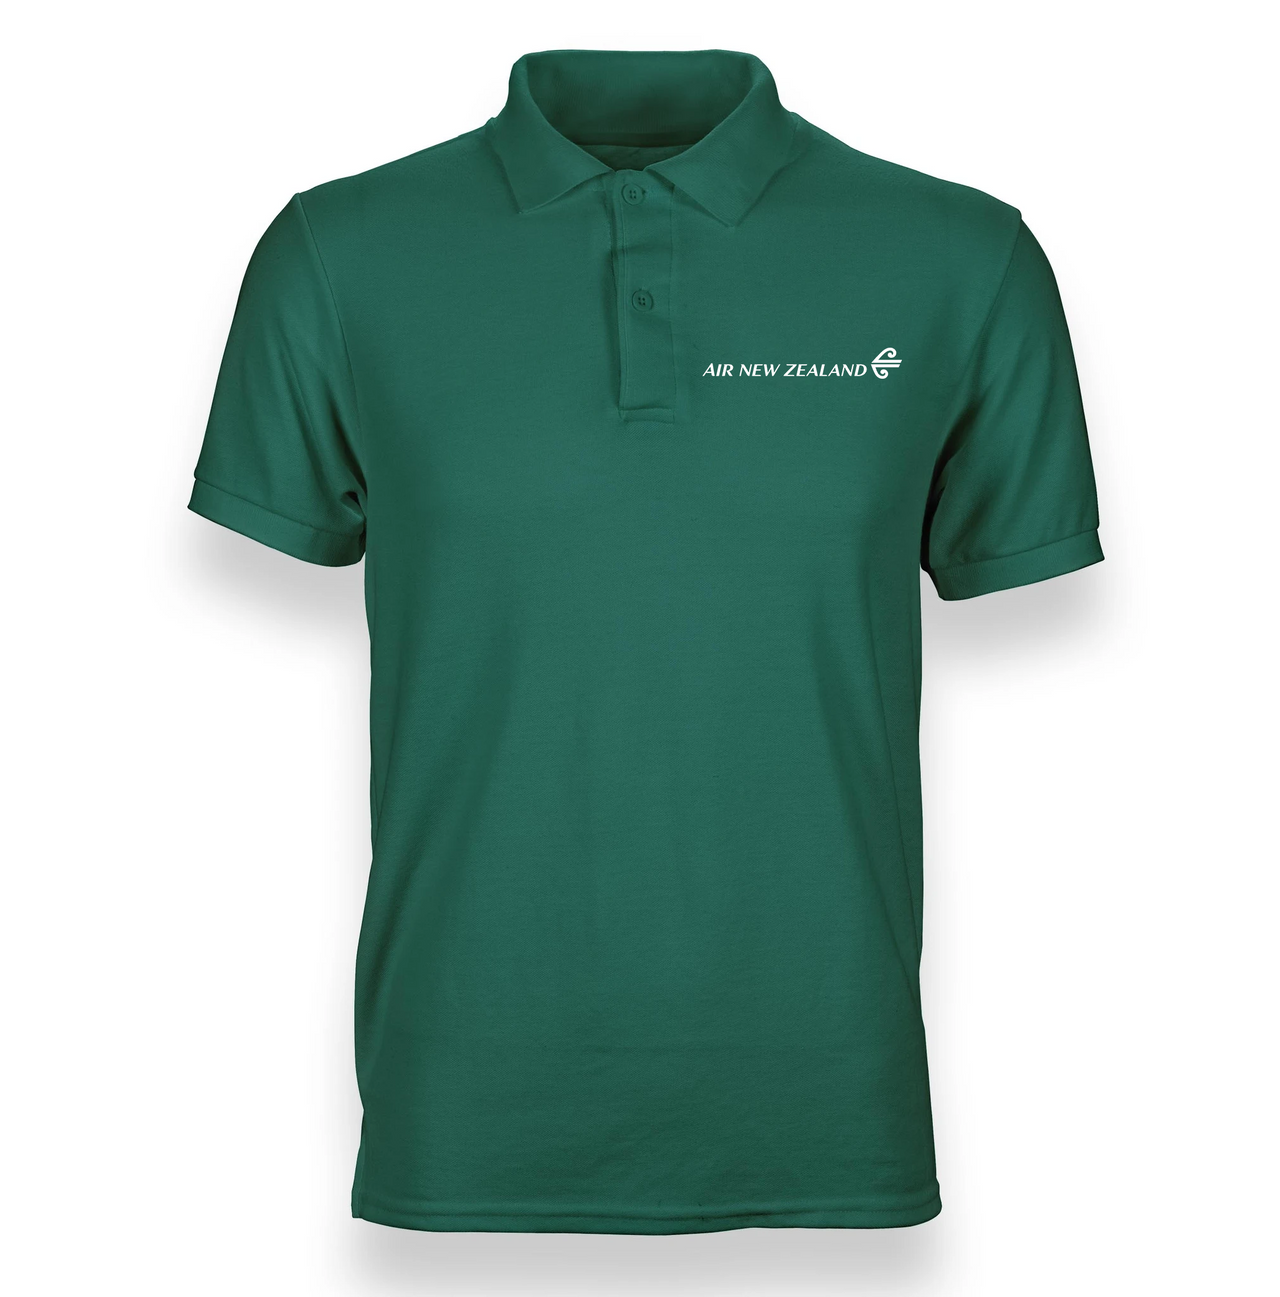 NEW ZEALAND AIRLINES POLO T-SHIRT